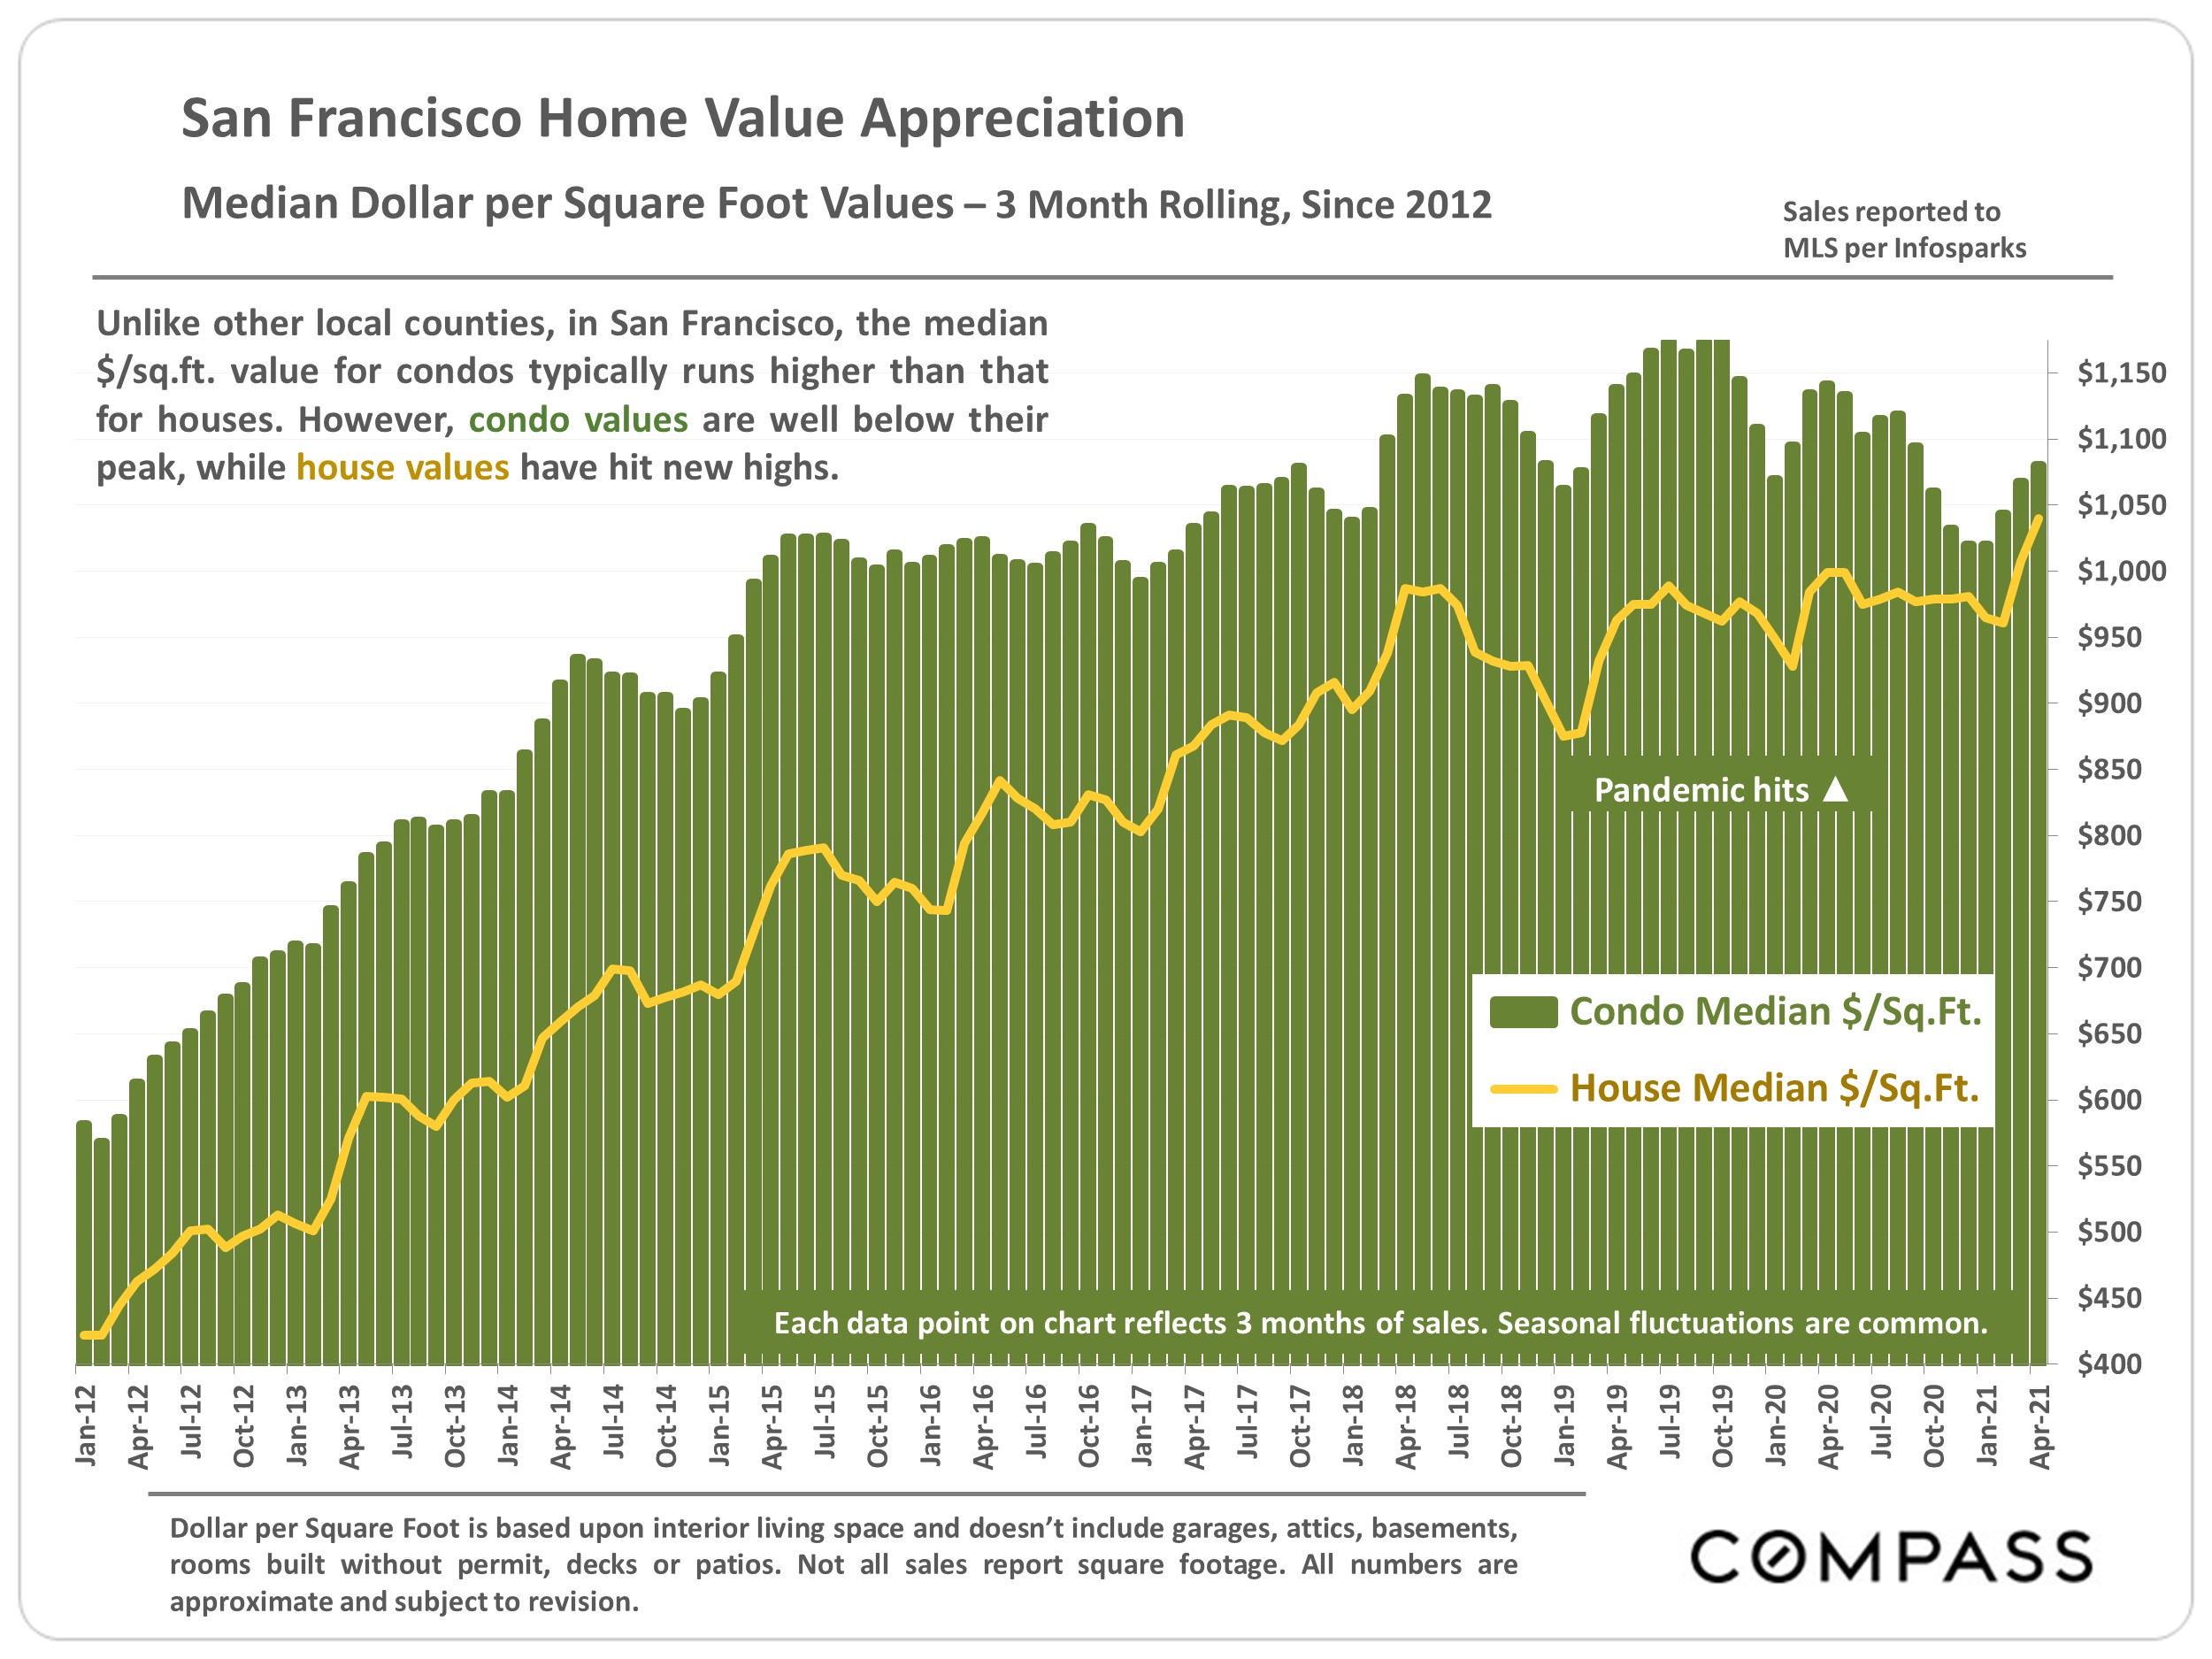 Chart showing the San Francisco Home Value Appreciation, Median Dollar per Square Foot Values, 3-month rolling, since 2012